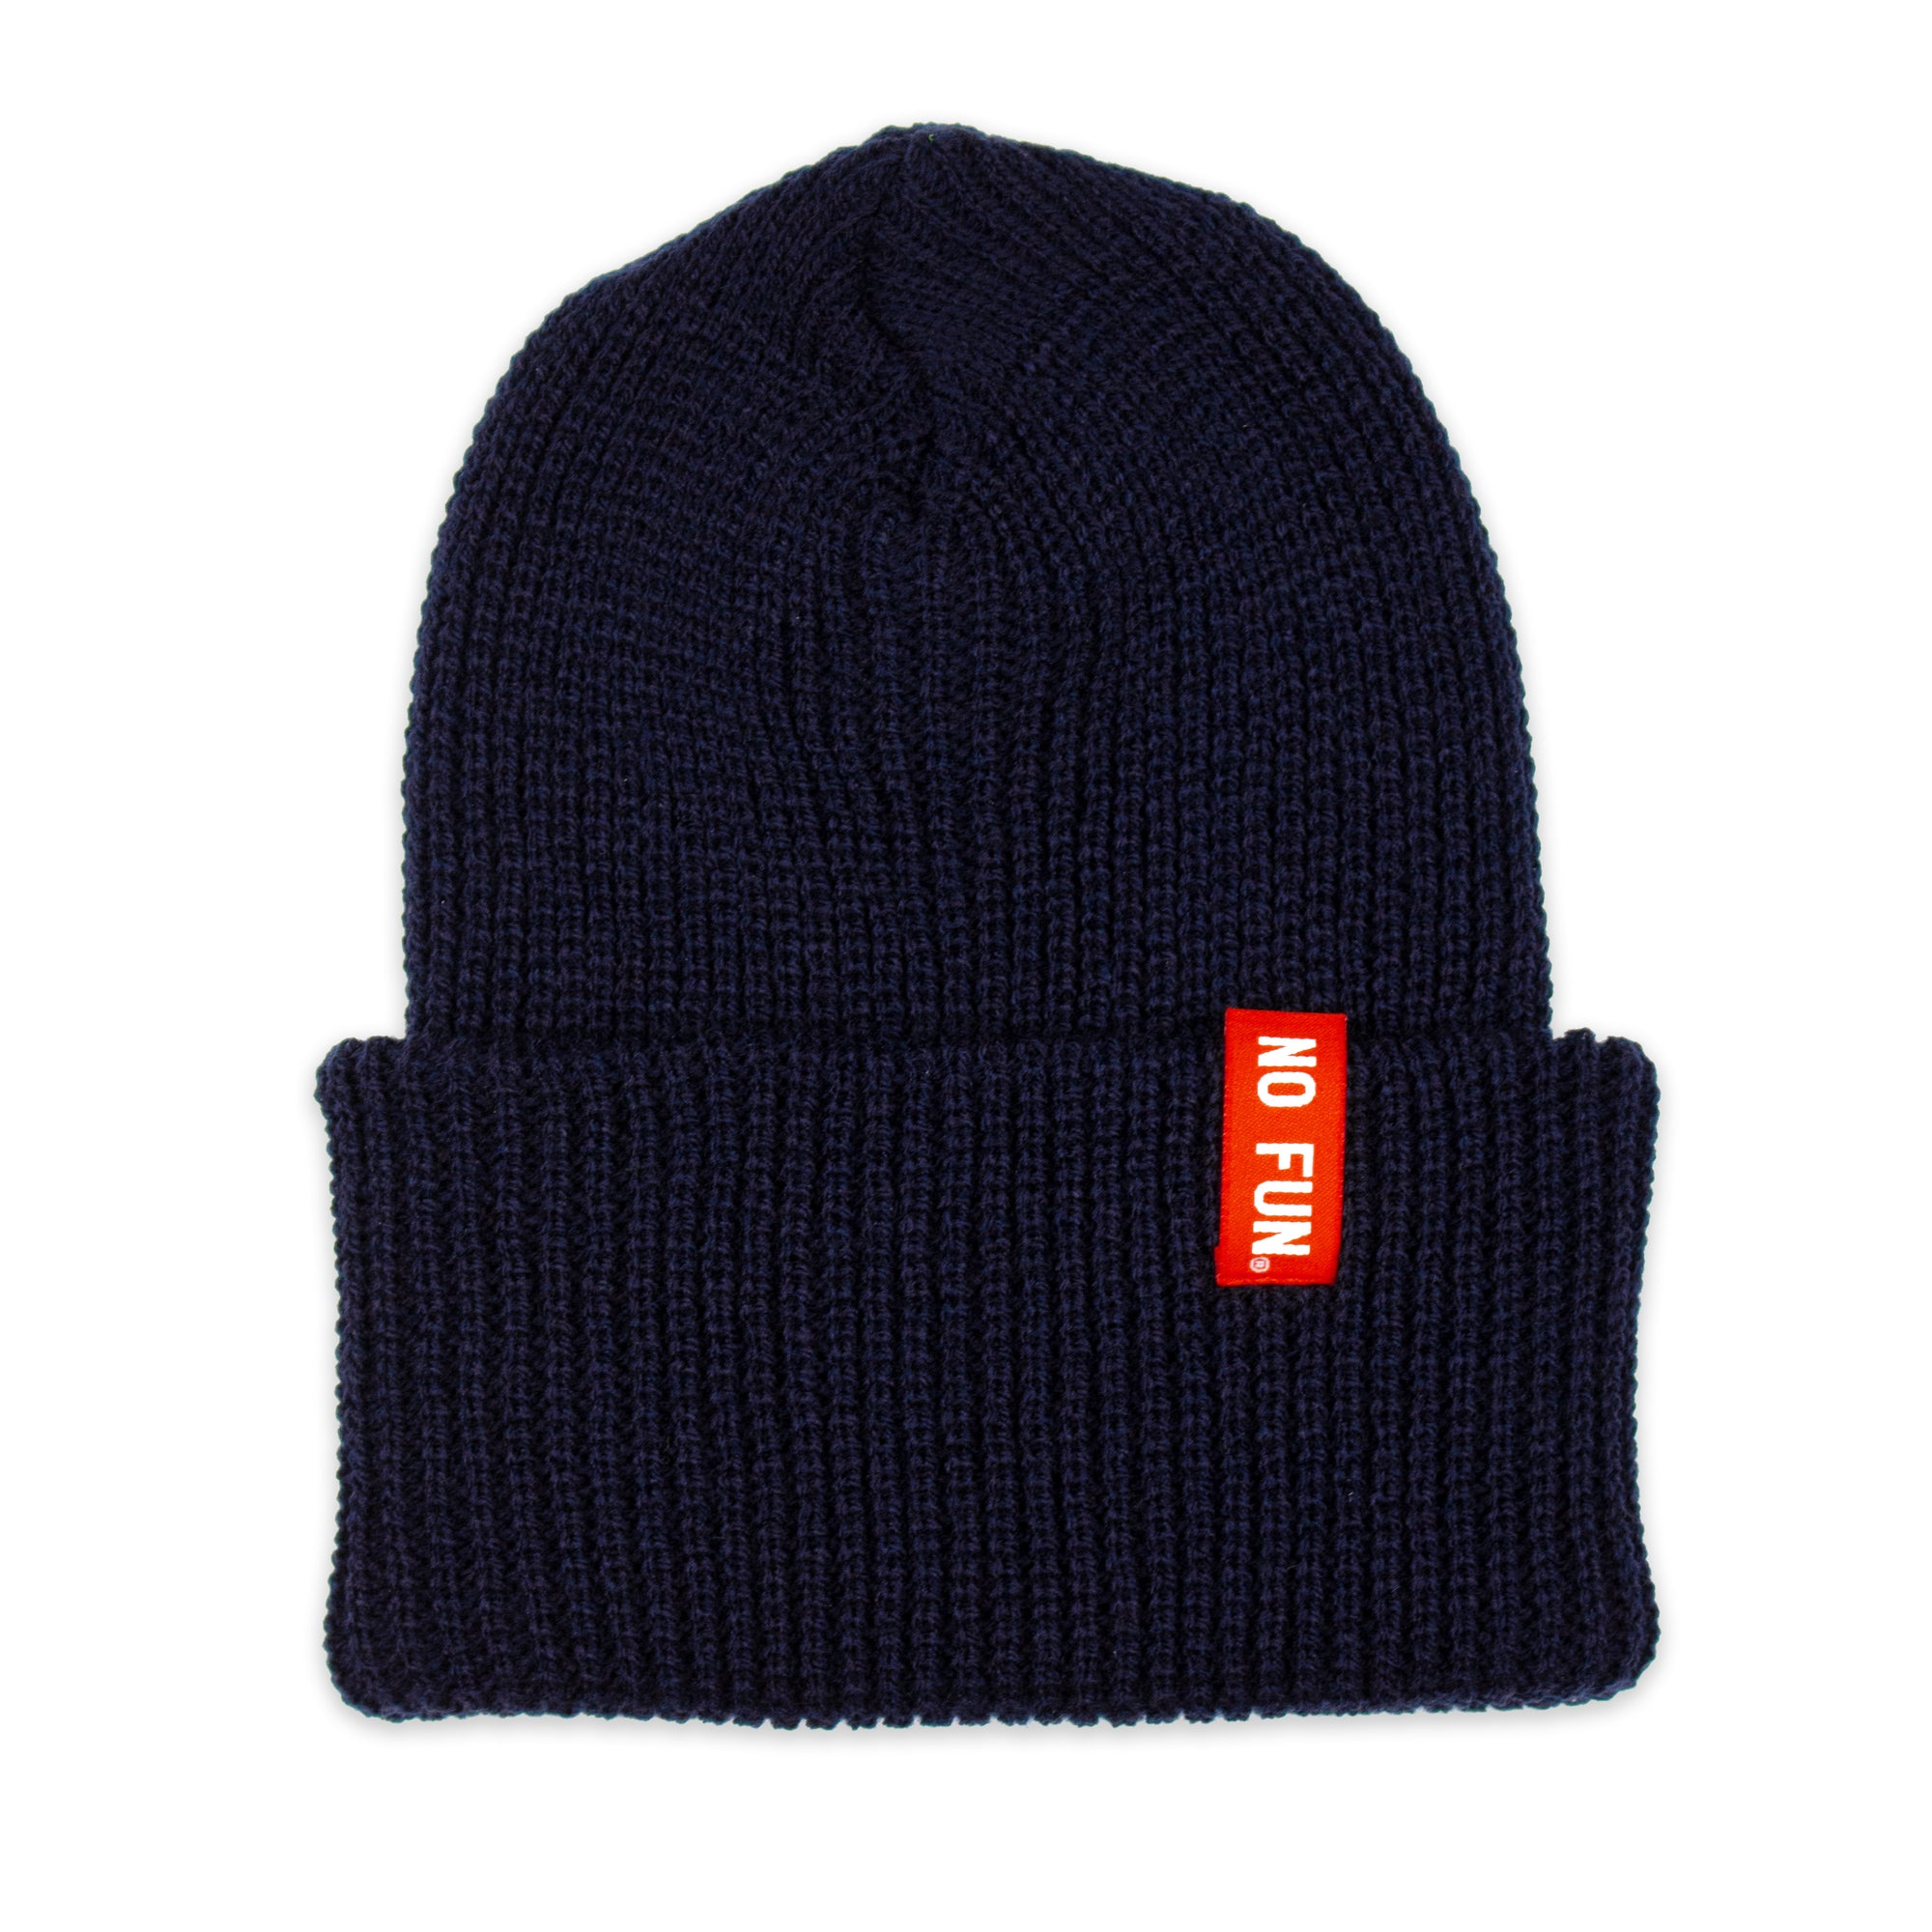 Photo of the "No Fun®" Ribbed beanie photographed against a white background.  Beanie is Navy Blue, and features a small, red, woven label that folds over the cuff.  The text on the red label says "No Fun®" in white.